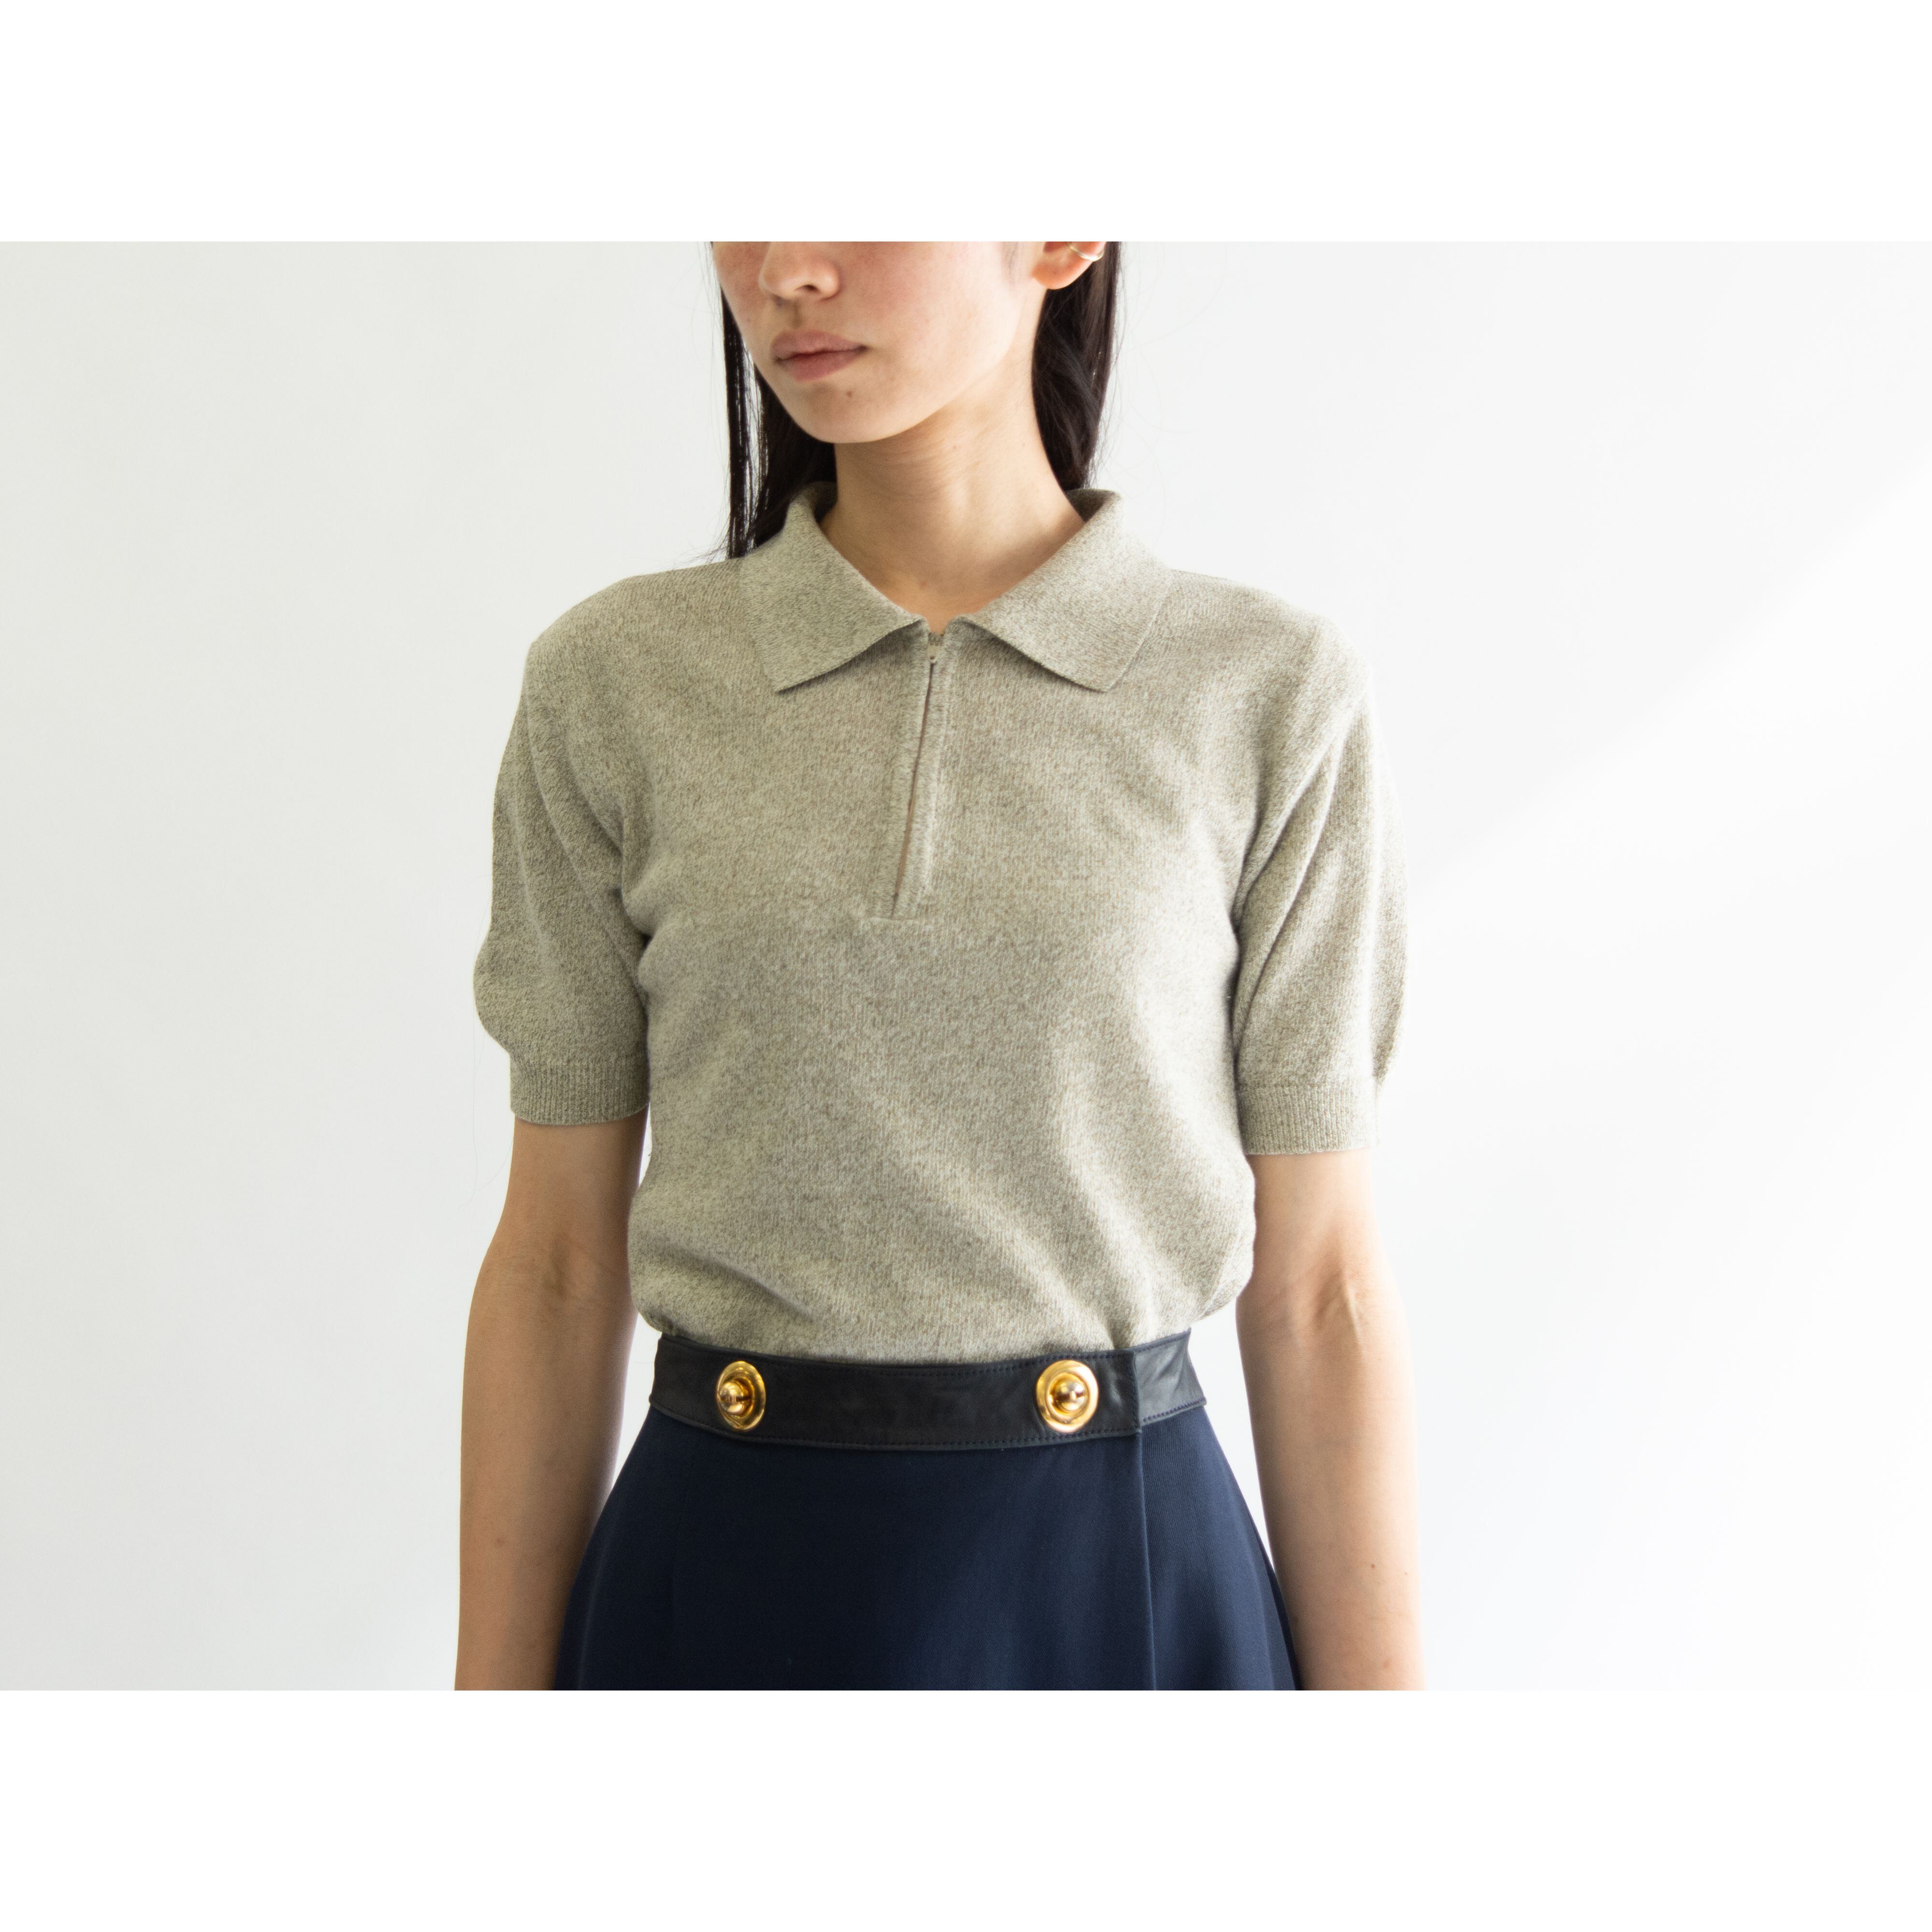 【artisan TRICOT】Made in France Cotton-Nylon-Acrylic Knit Polo Shirt（フランス製 コットンナイロンアクリル ニットポロシャツ）